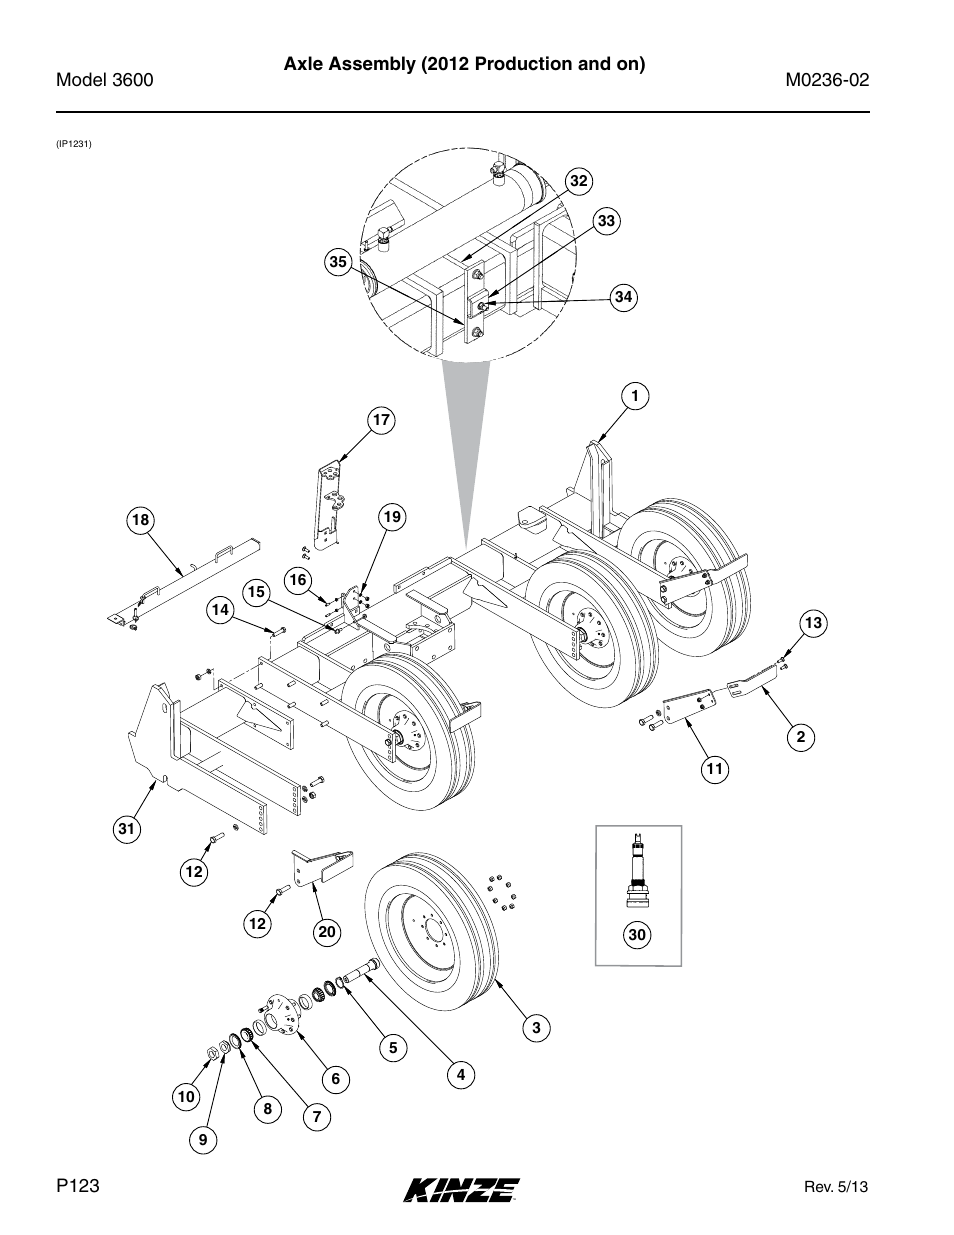 Axle assembly (2012 production and on) | Kinze 3600 Lift and Rotate Planter Rev. 5/14 User Manual | Page 126 / 302